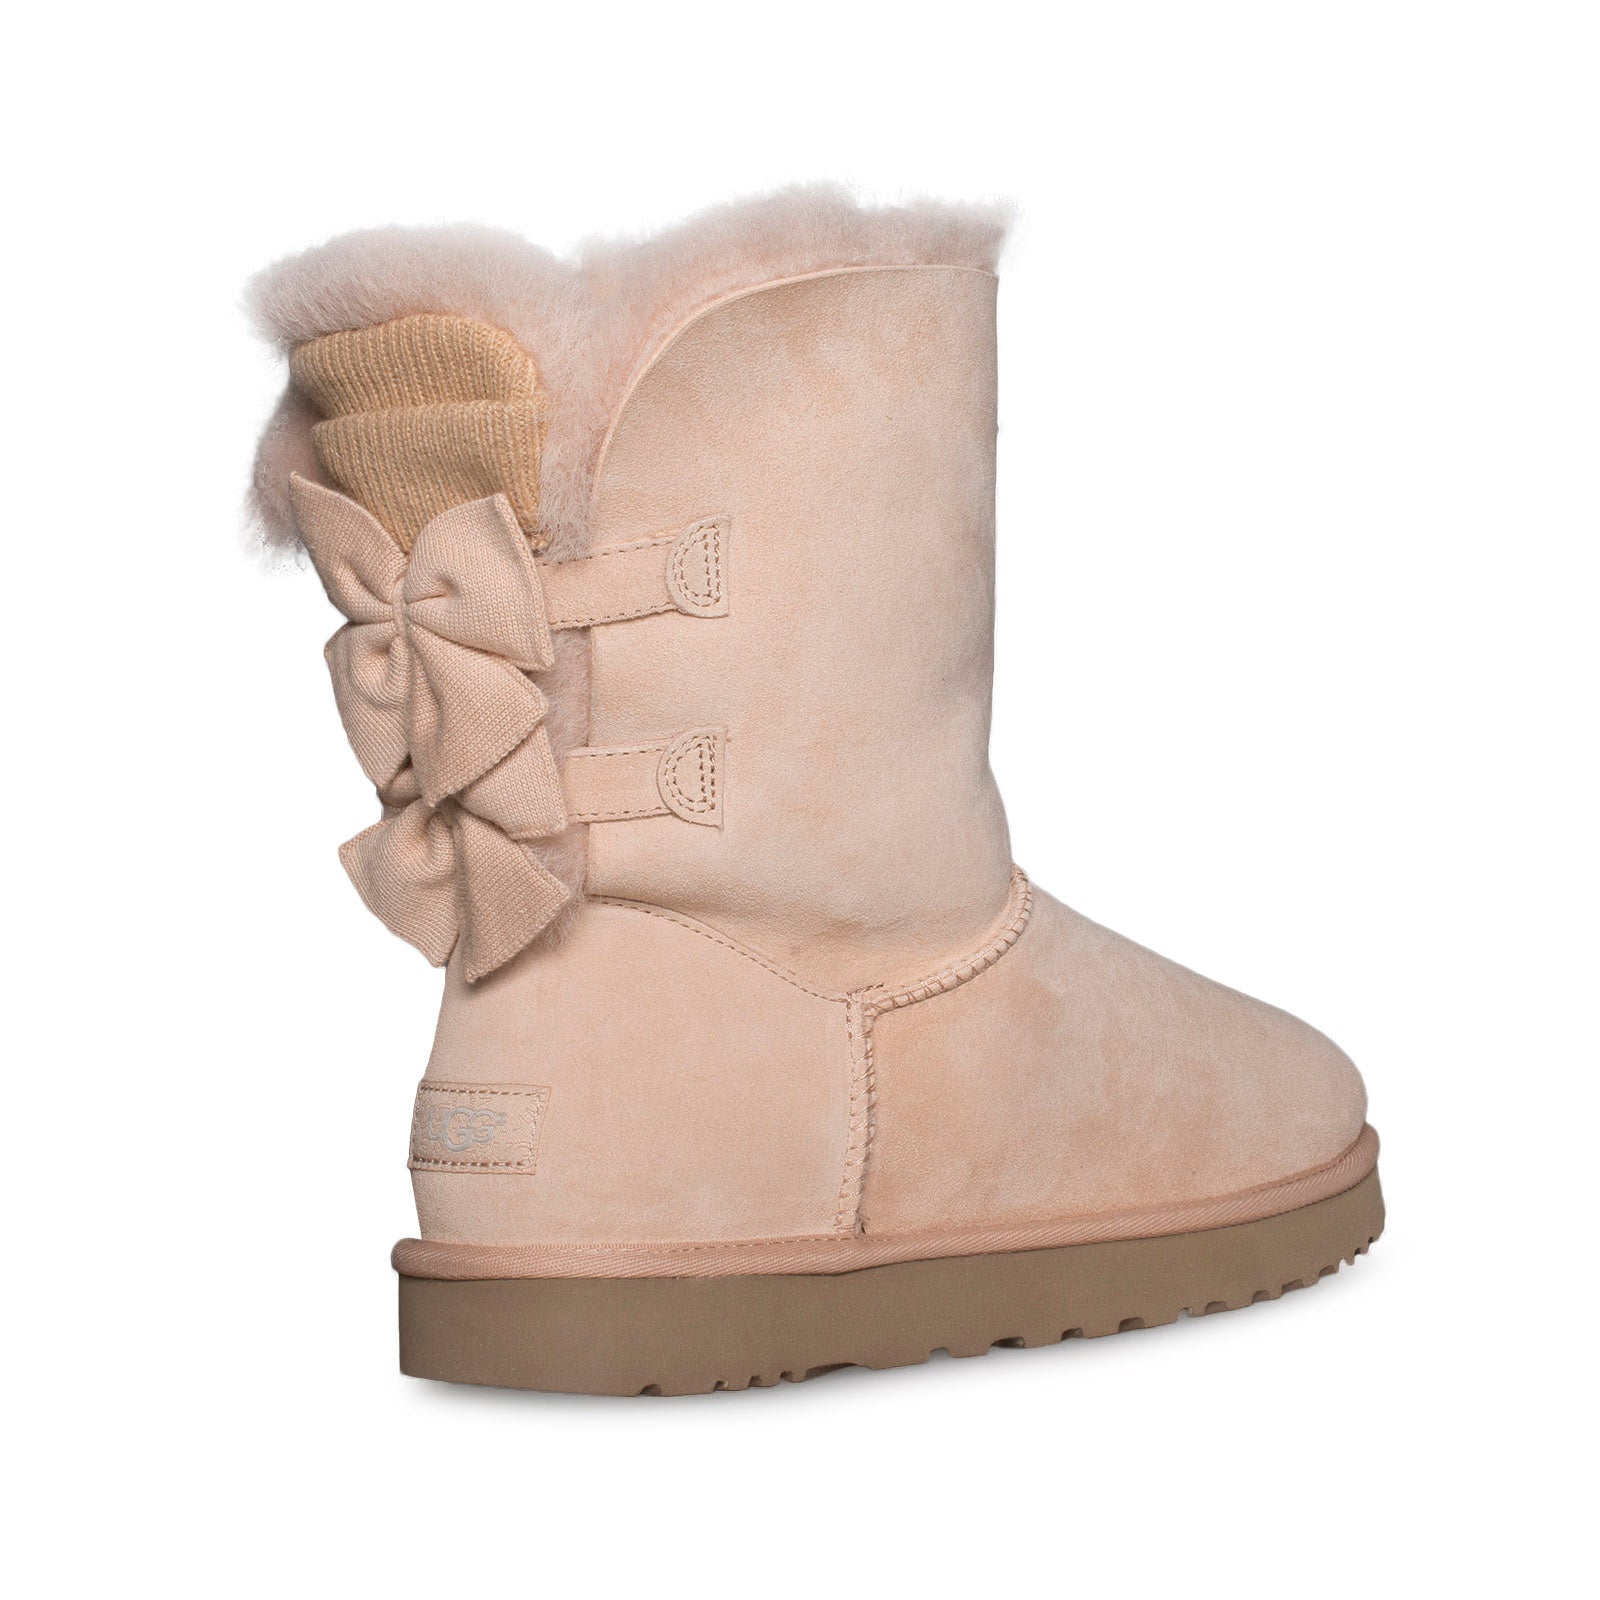 light brown uggs with bows